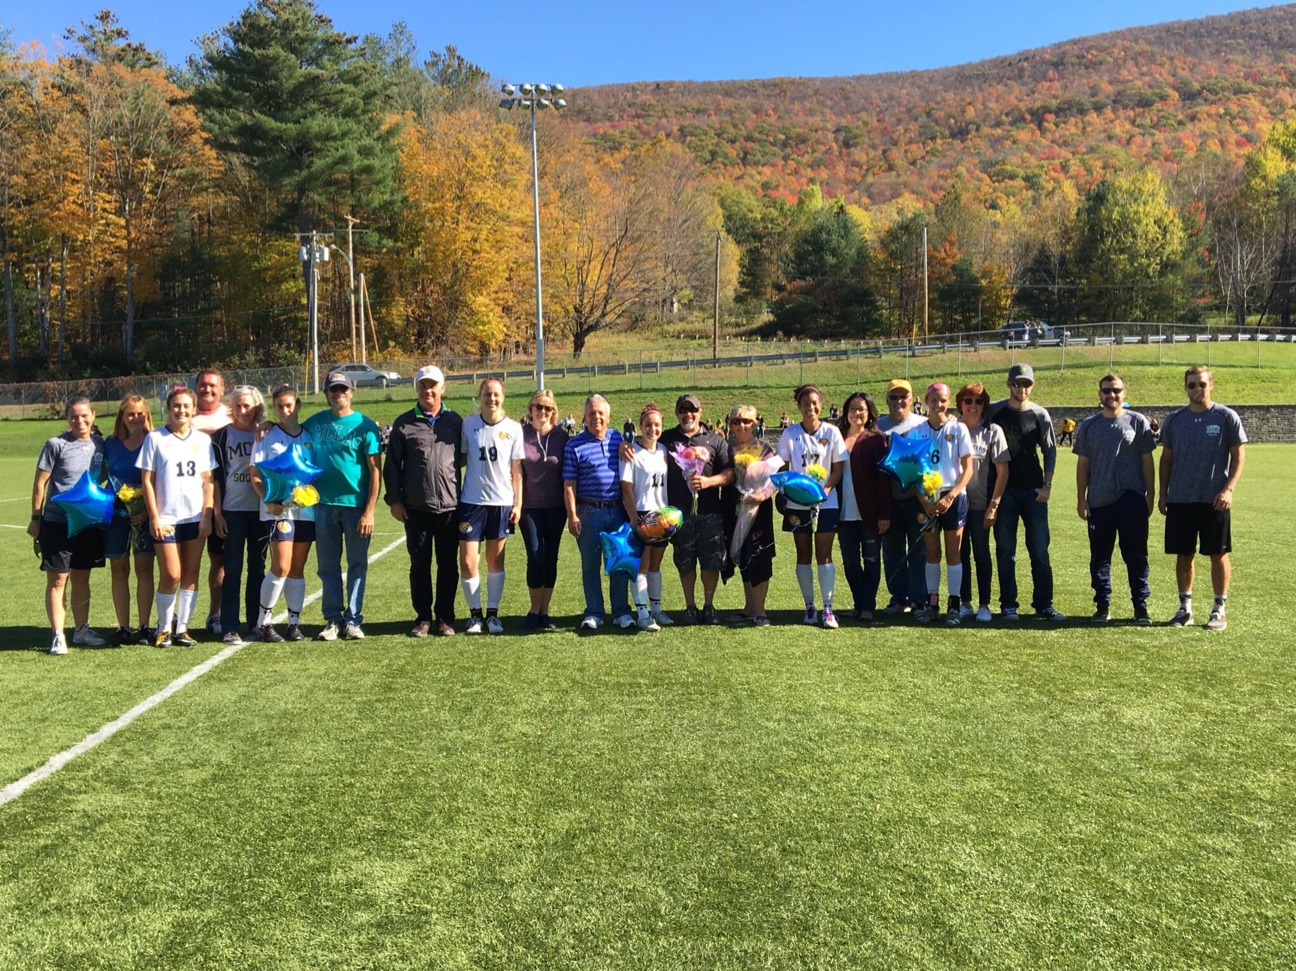 Women's Soccer nipped by Salem State on Senior Day